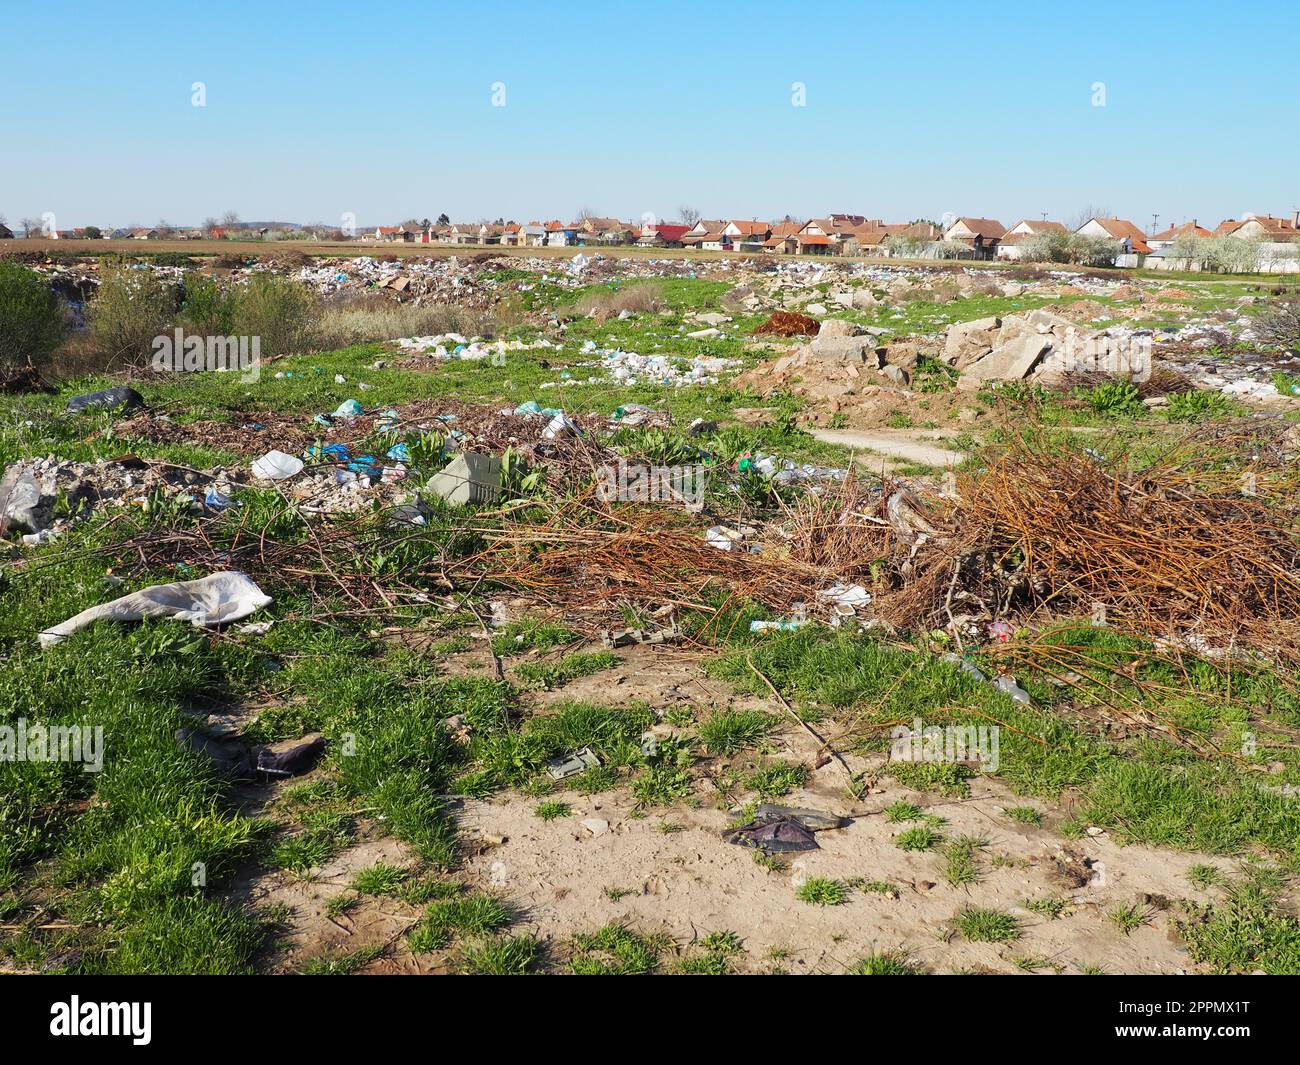 Sremska Mitrovica, Chalma, Serbia, 5 April 2021garbage dump near the village. Chaotic unofficial dump. Plastic, bags, paper, glass, biological waste. Green grass next to dirt. Ecological catastrophy. Stock Photo